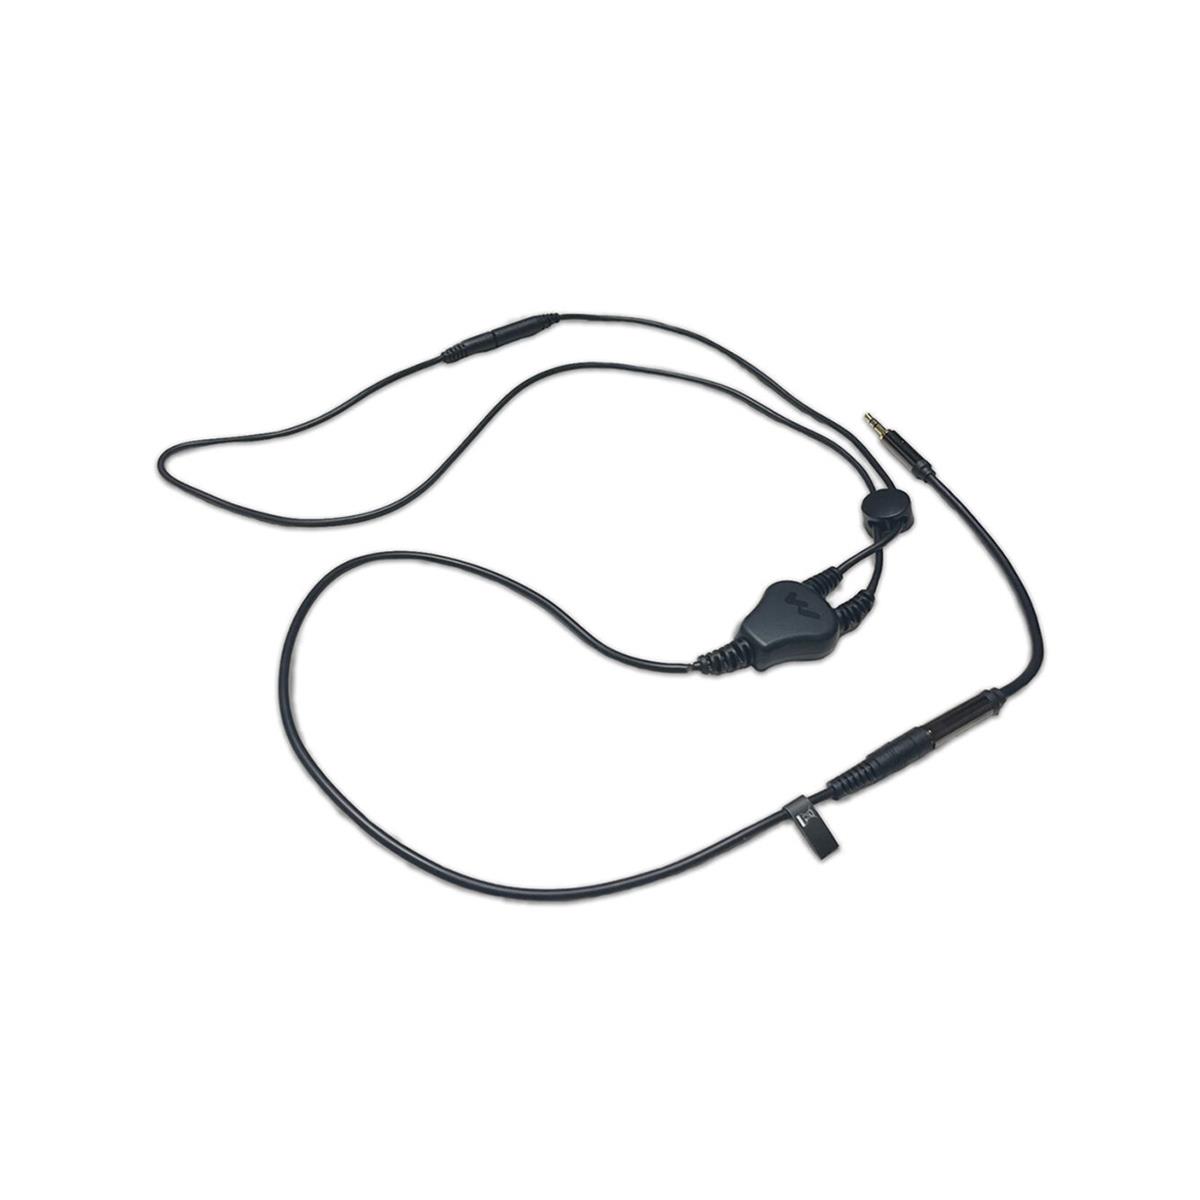 Image of Williams Sound 18.5&quot; Neckloop Cord w/3.5mm Stereo Adapter for Wav Pro Receiver